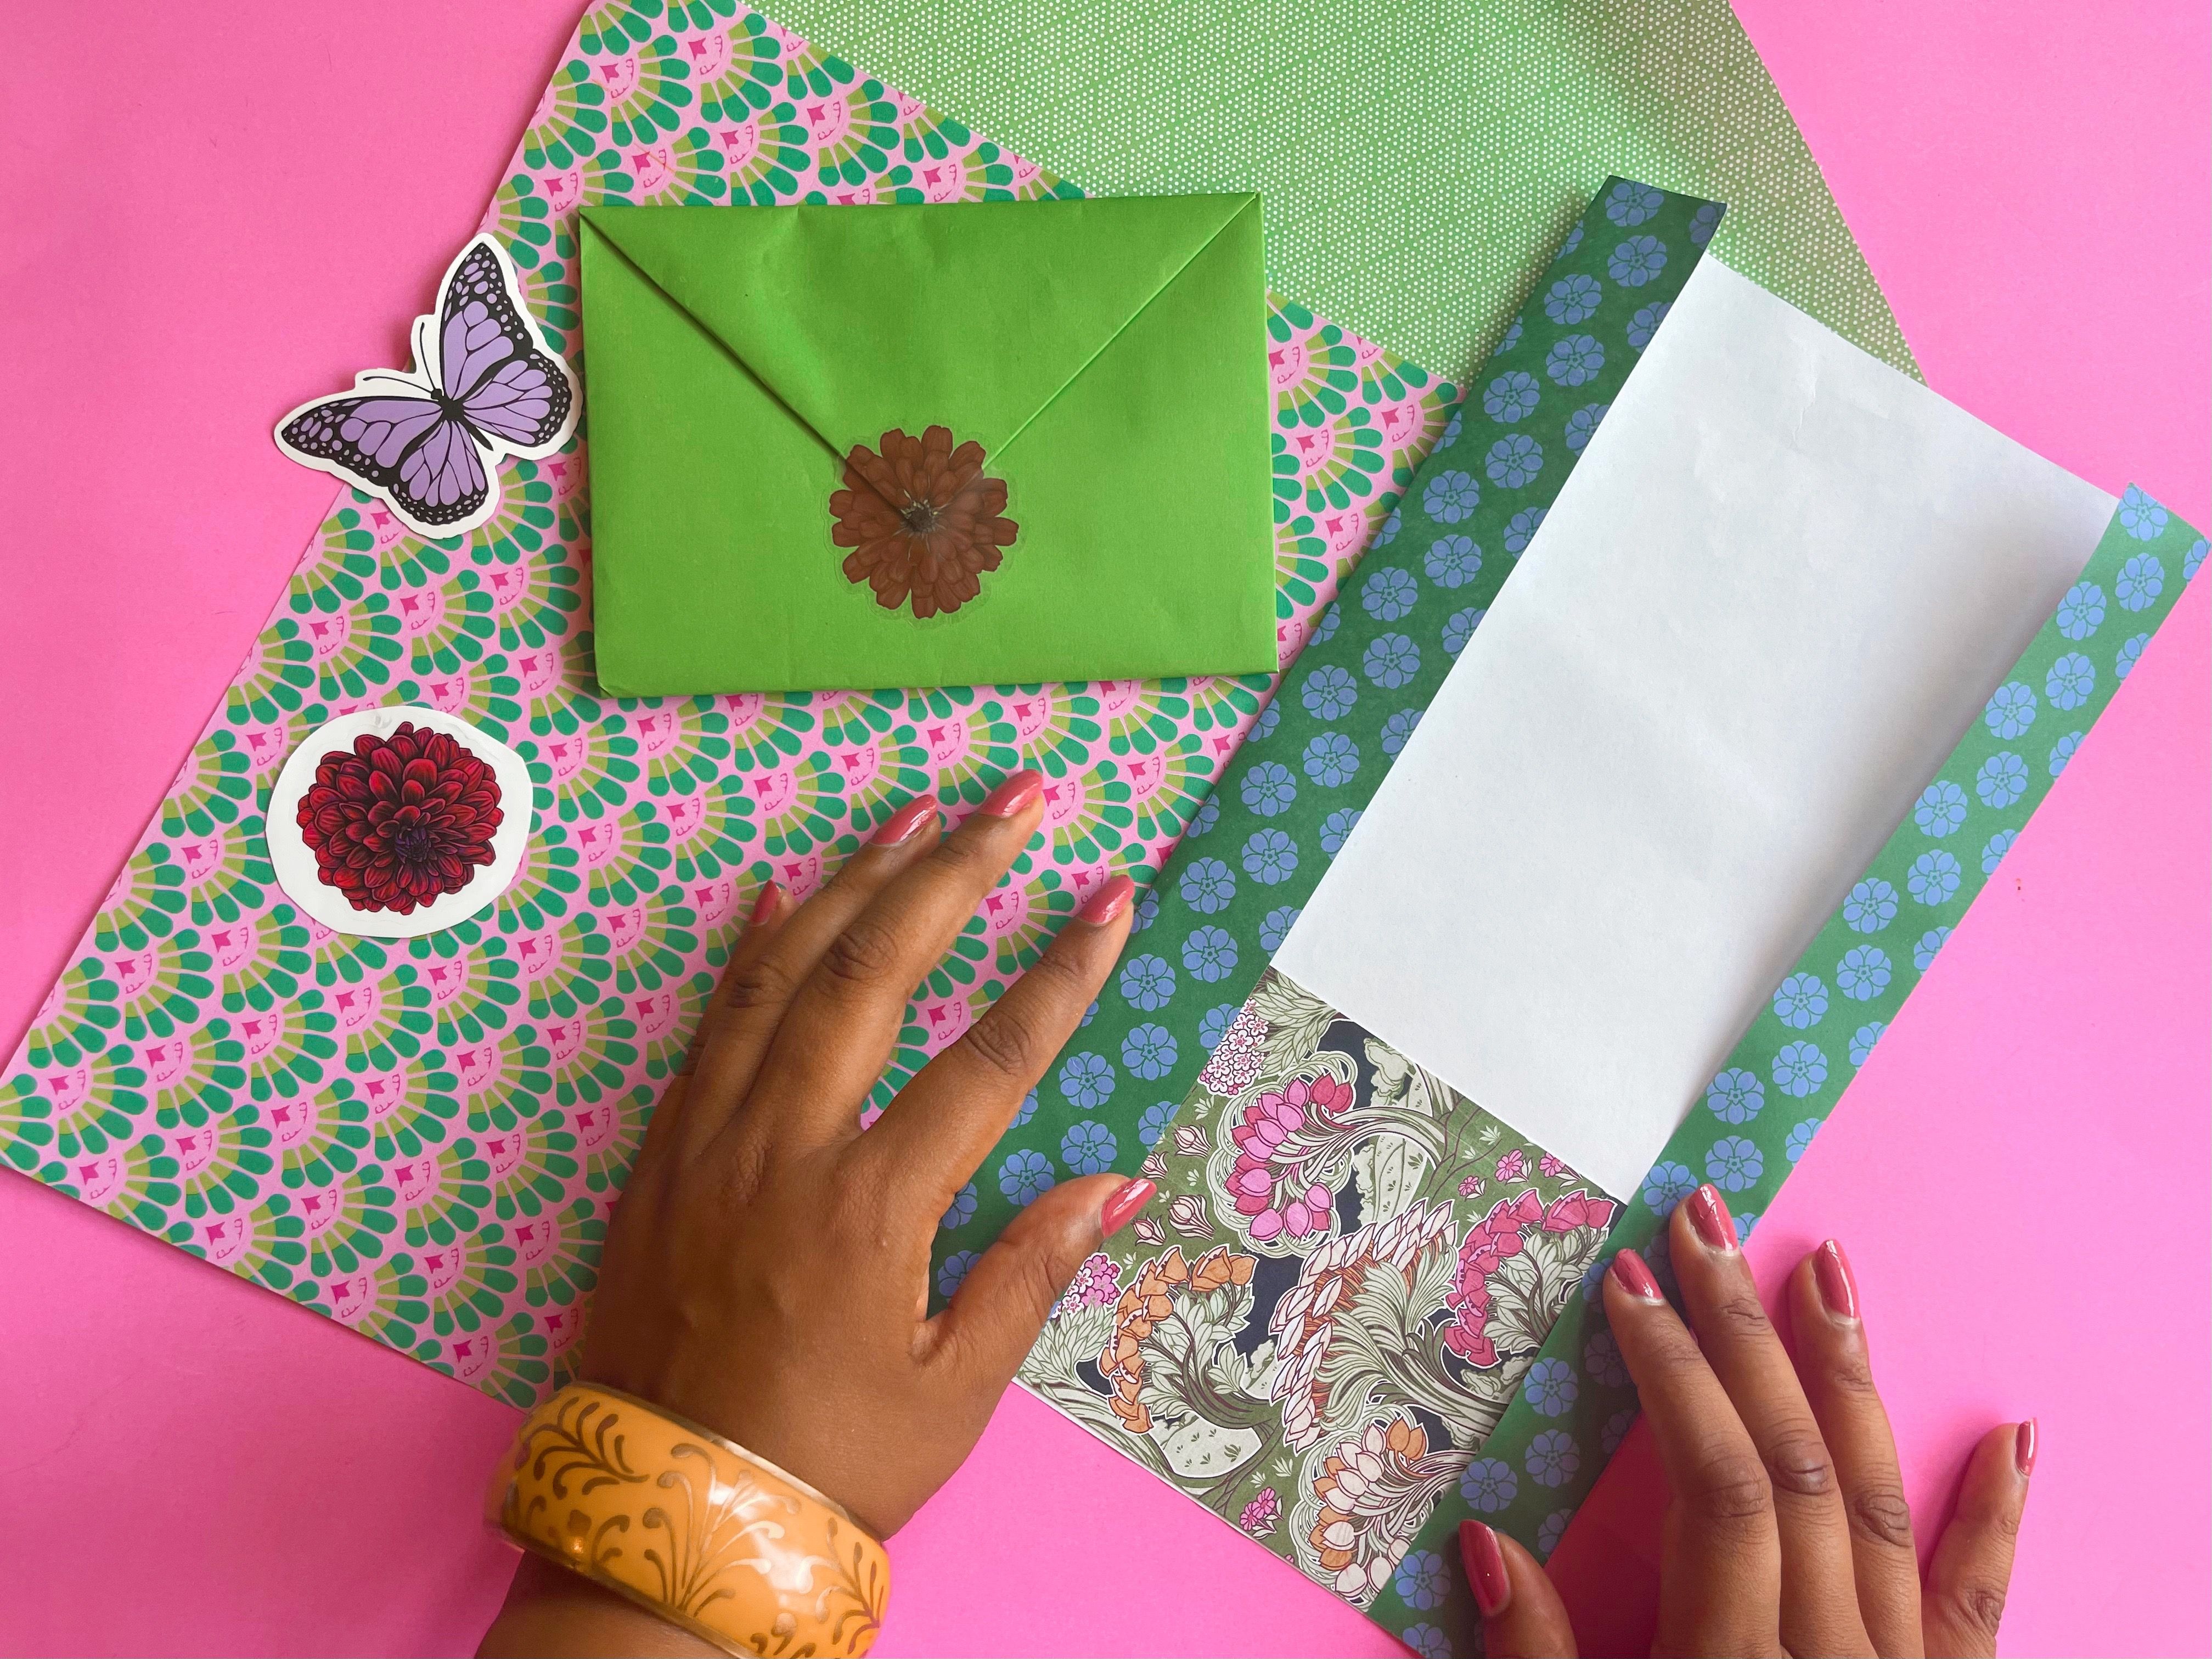 How to make an envelope in five simple steps